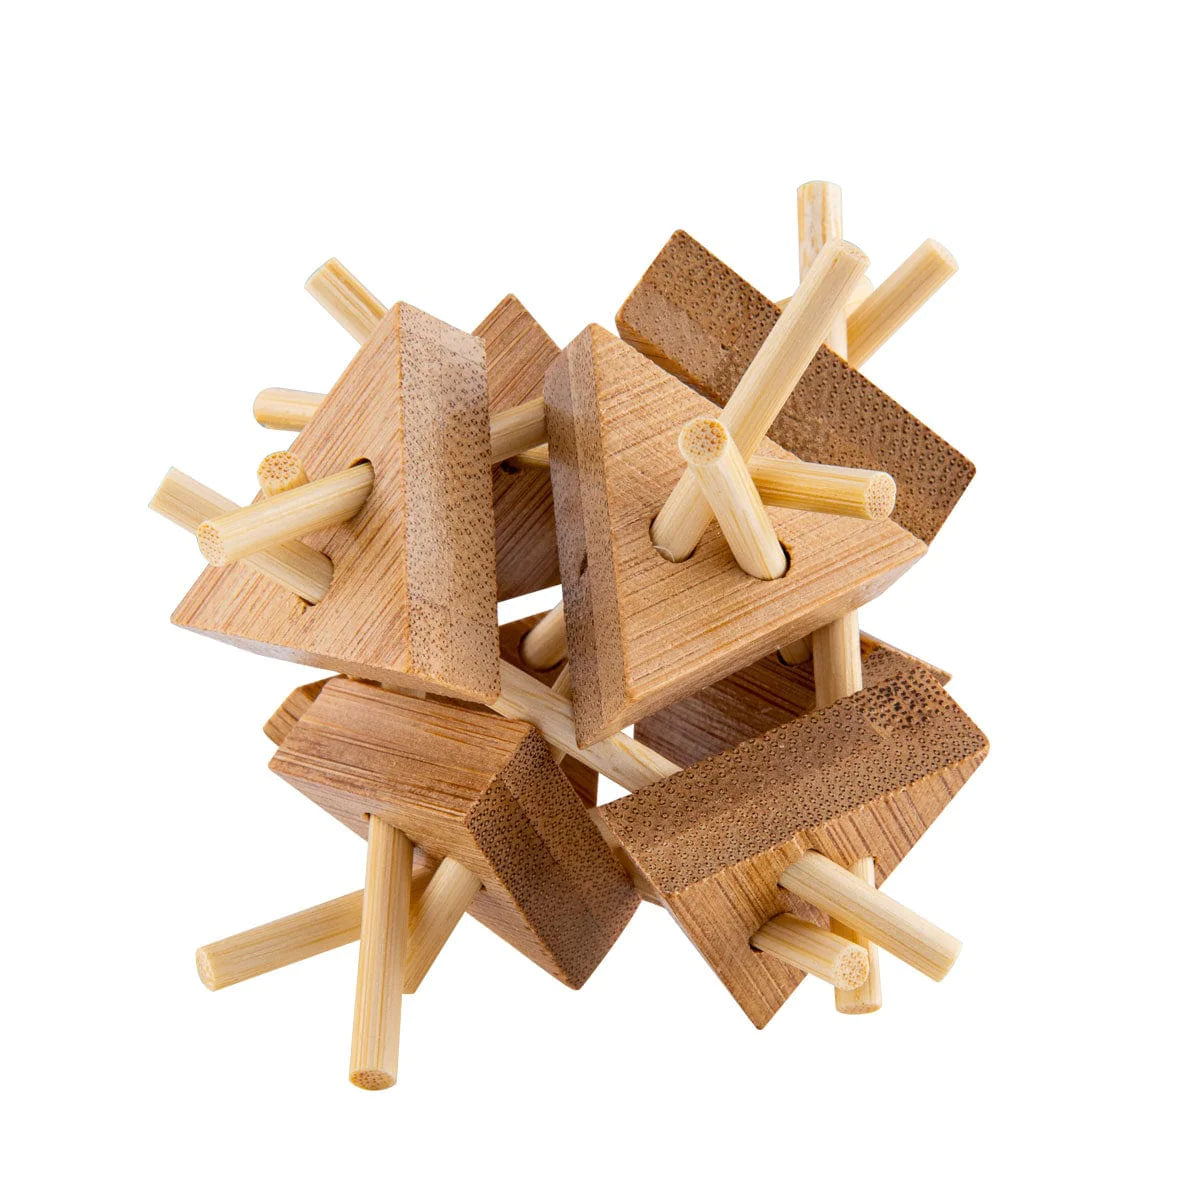 Bamboo 3D Puzzles